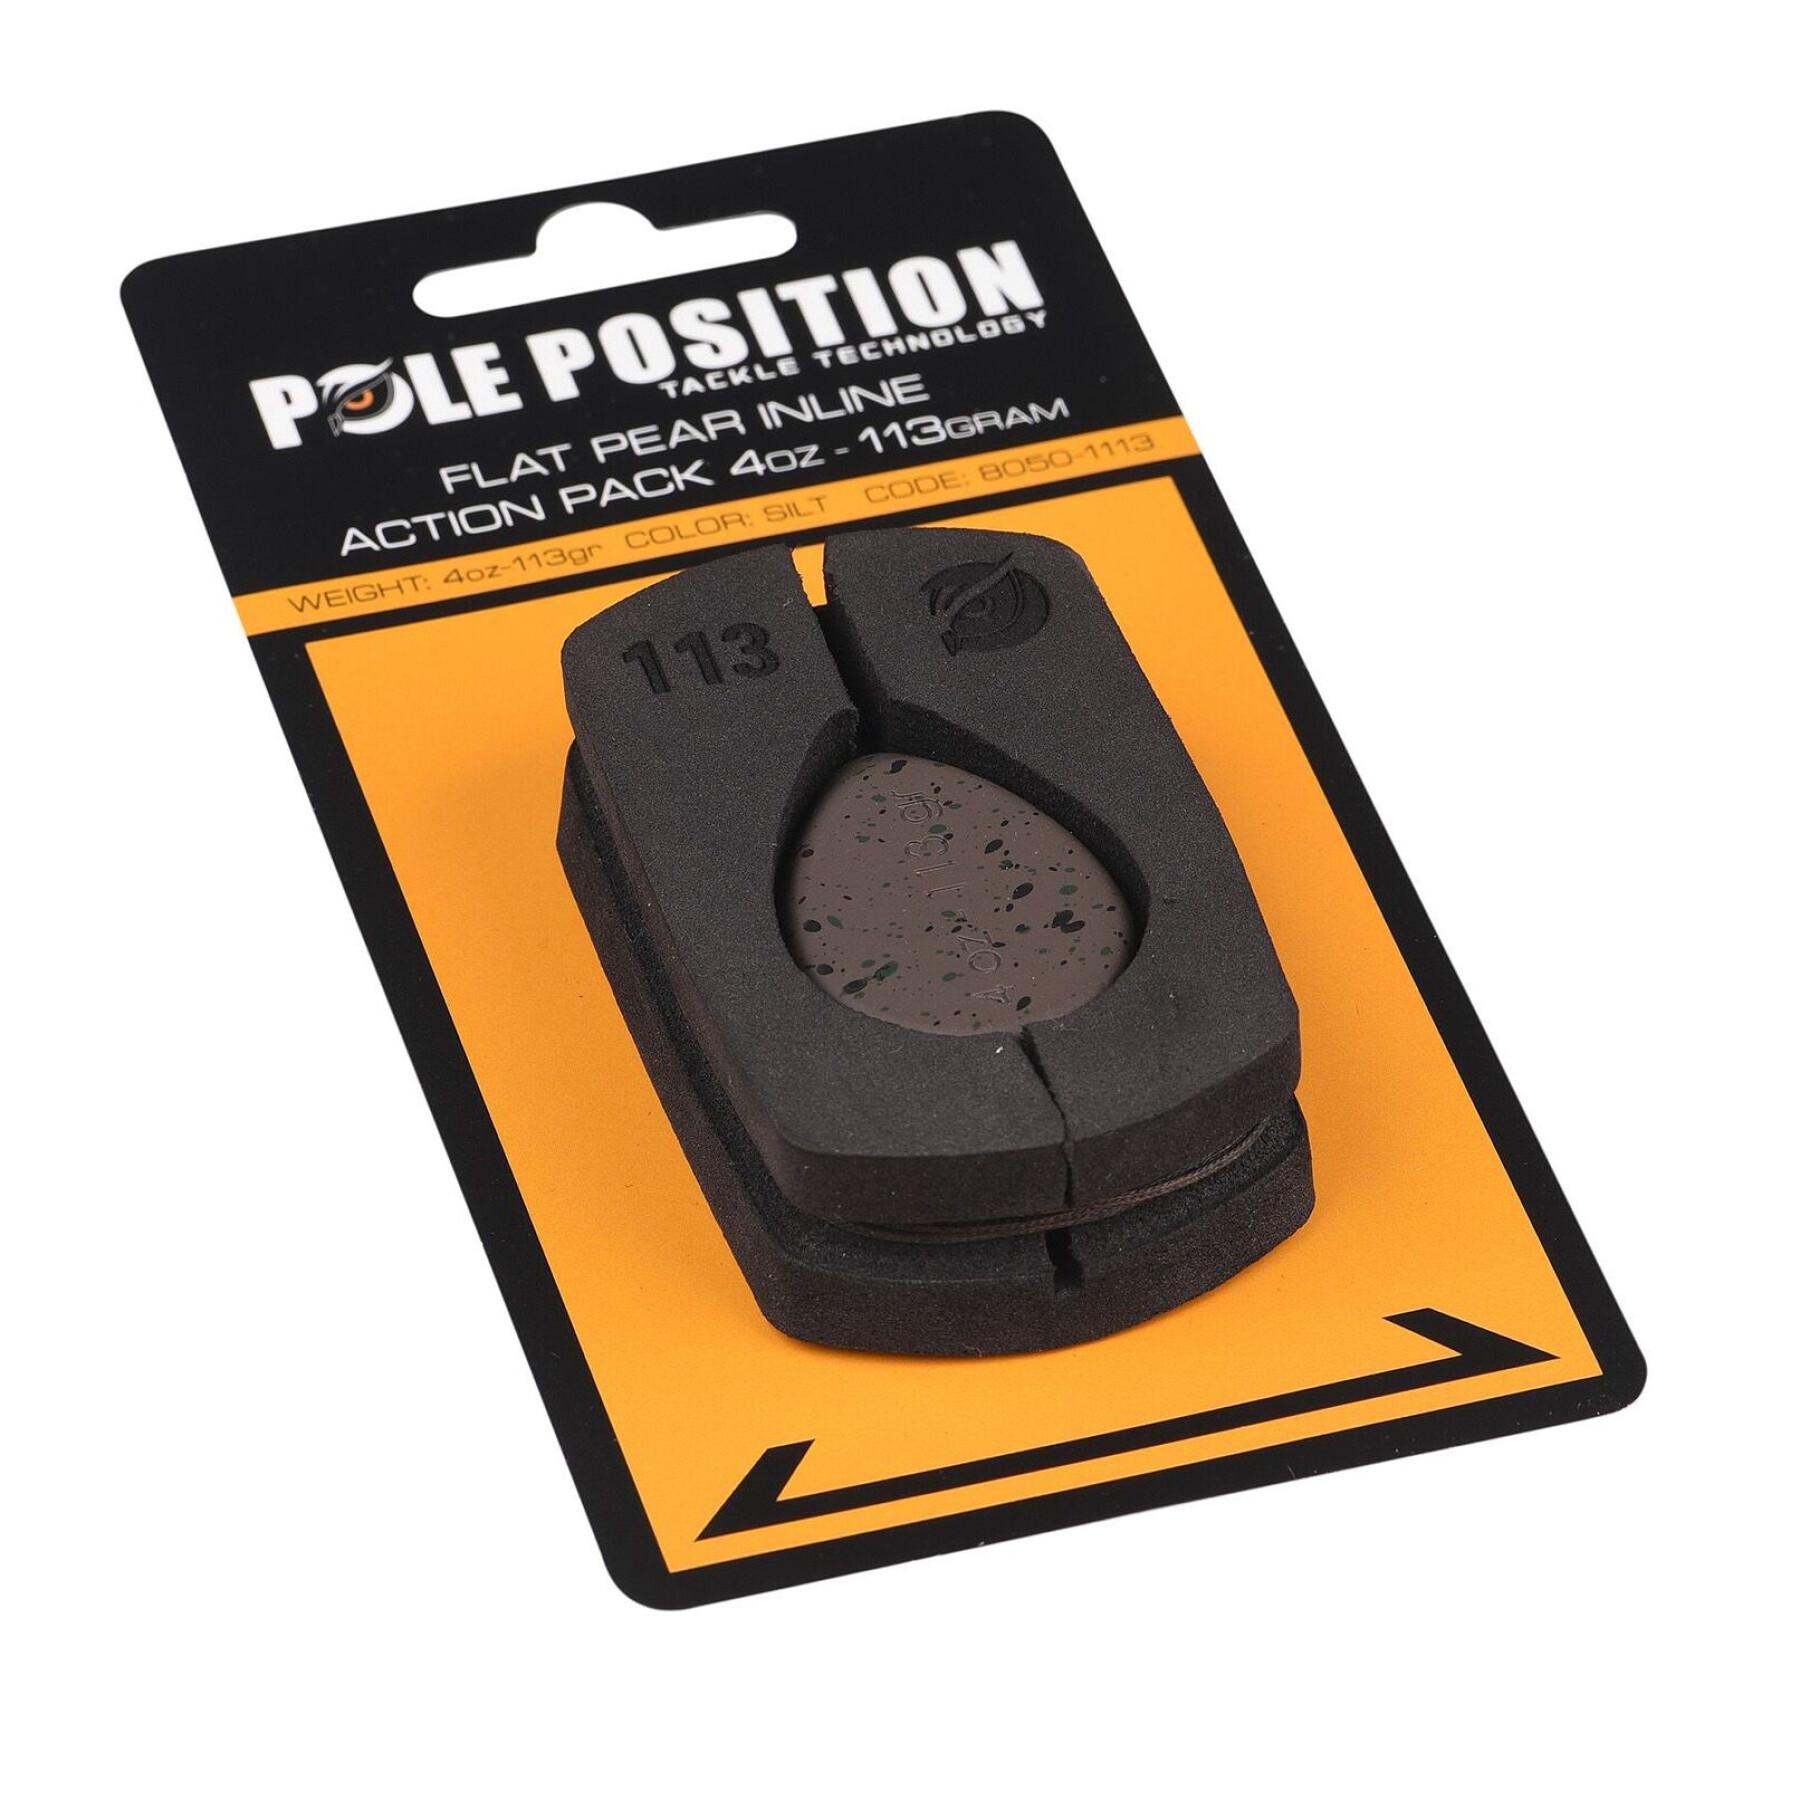 Bleipack in line plate Spro Pole Position Action 3 oz